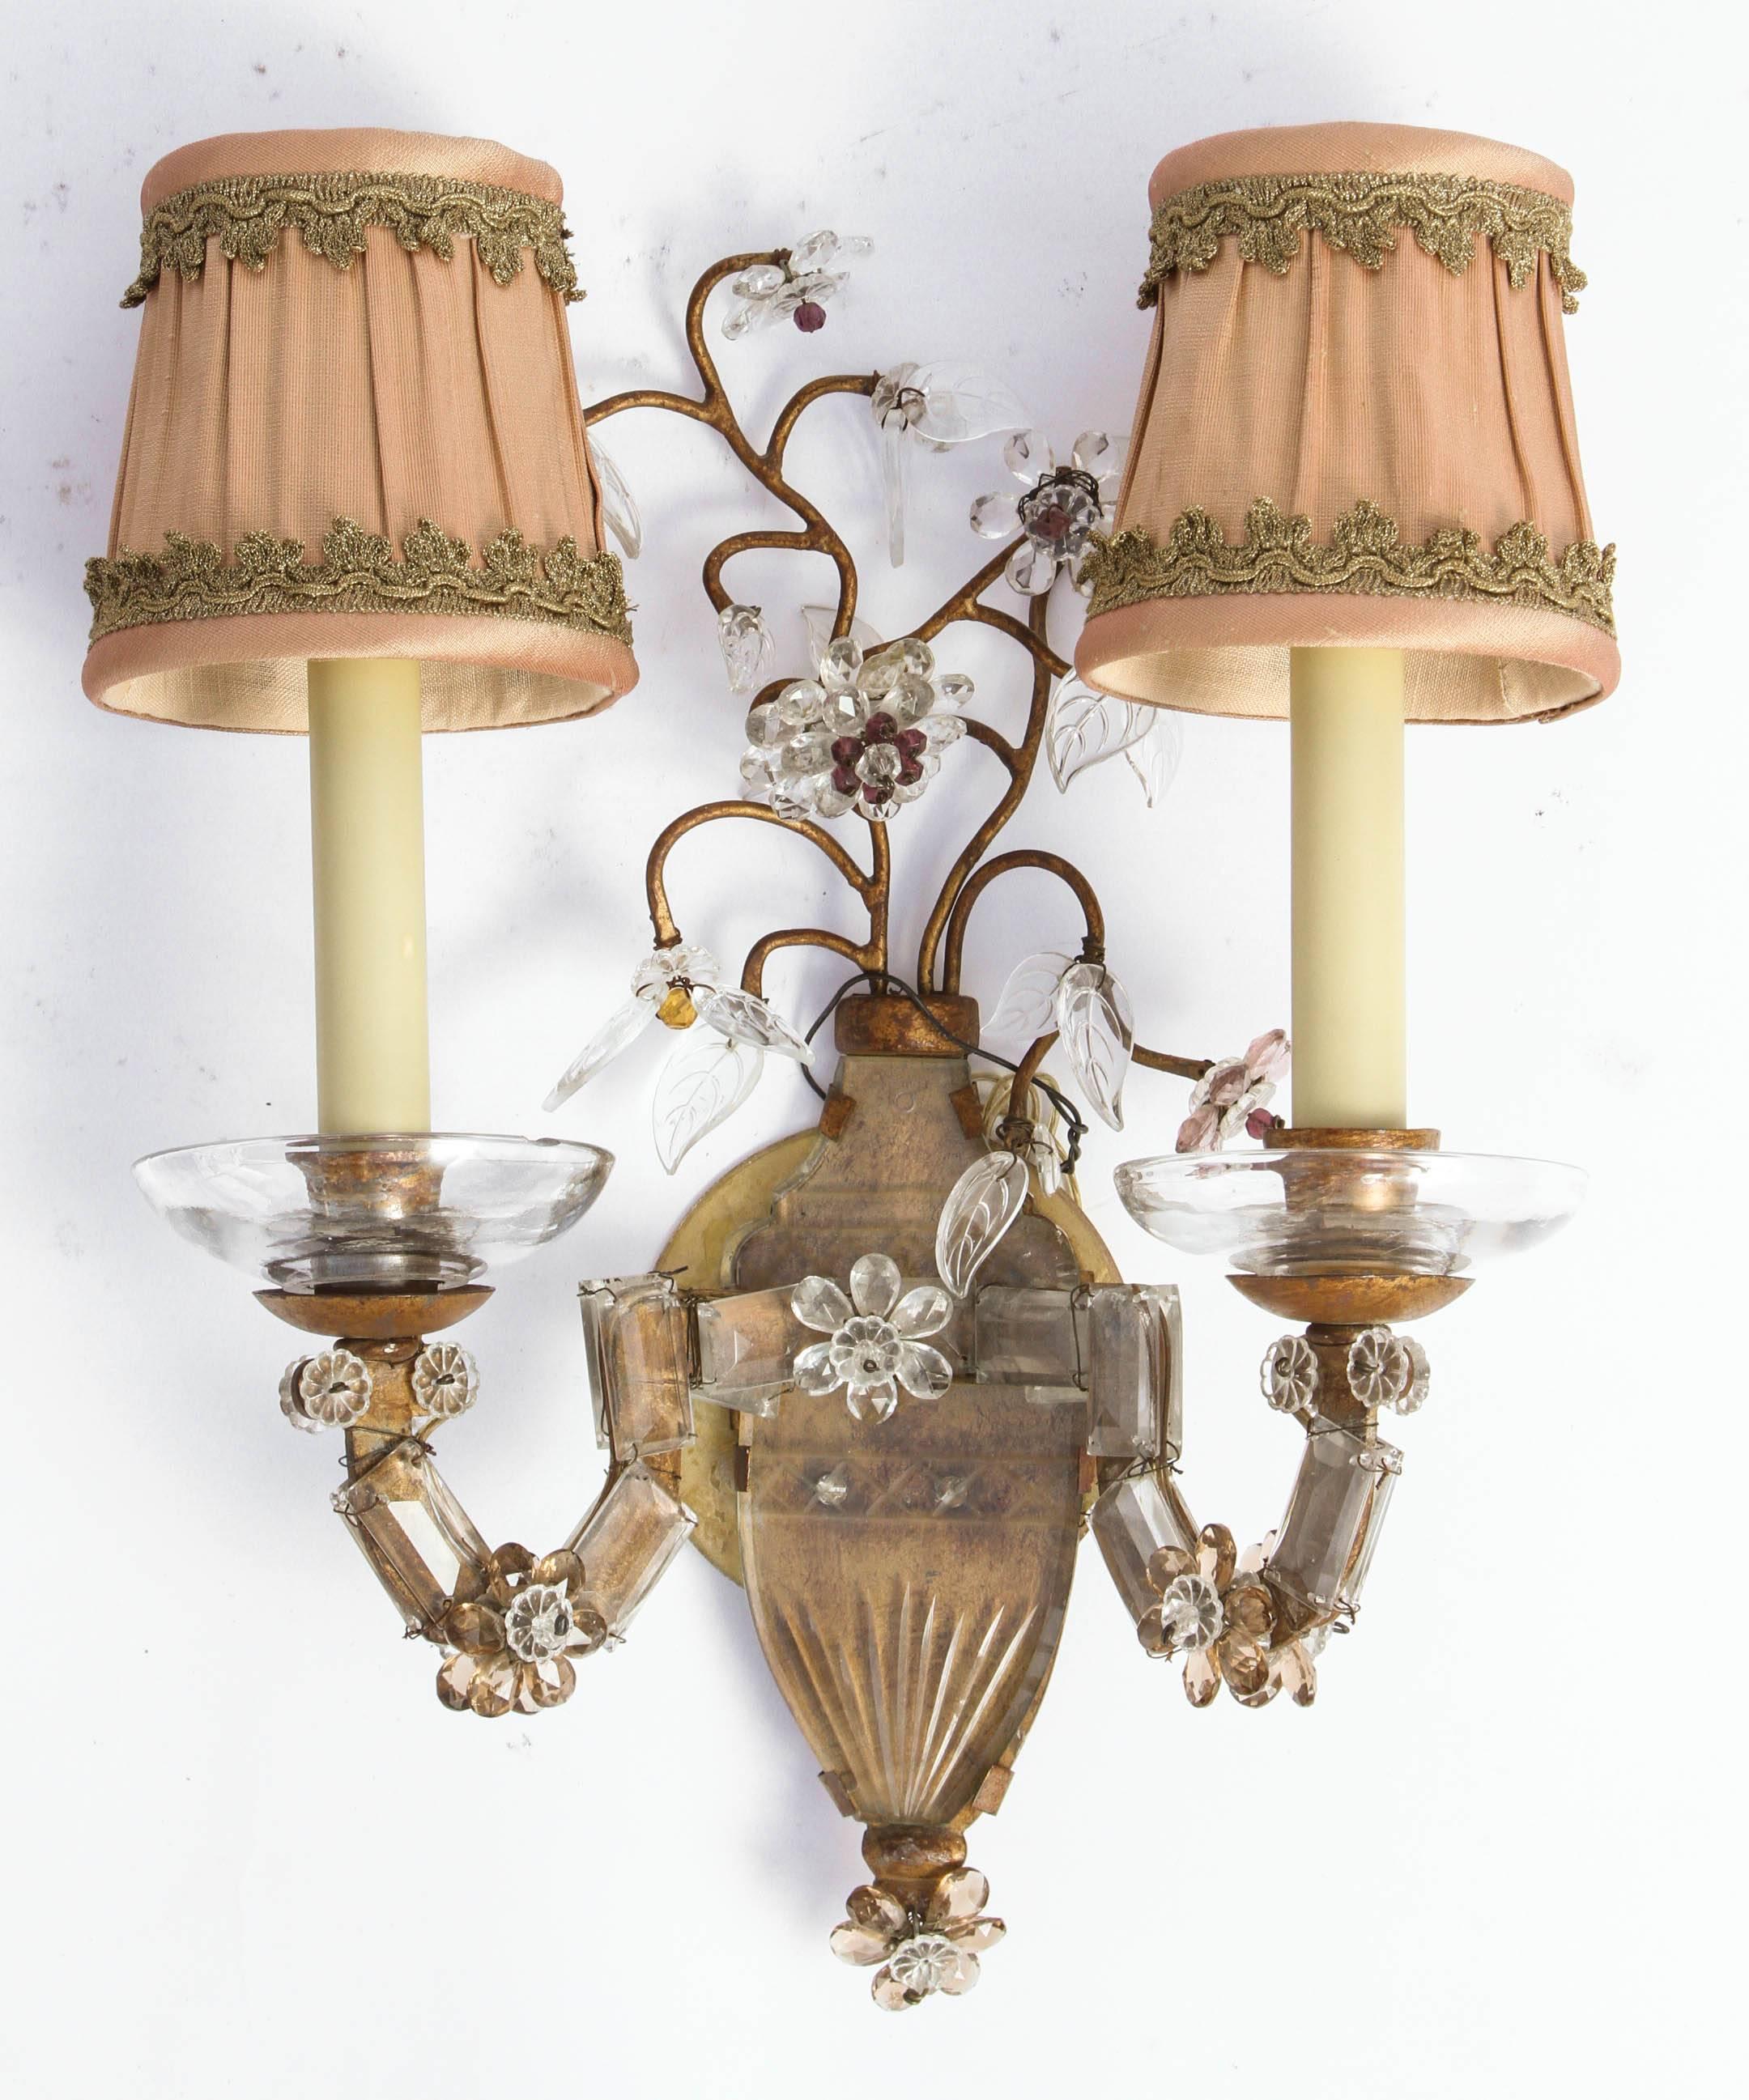 Pair of 1900-1920 flower and leaf motif French Bagues sconces with etched glass. These sconces have been newly wired. The price quoted is for one pair but there are two pair available.